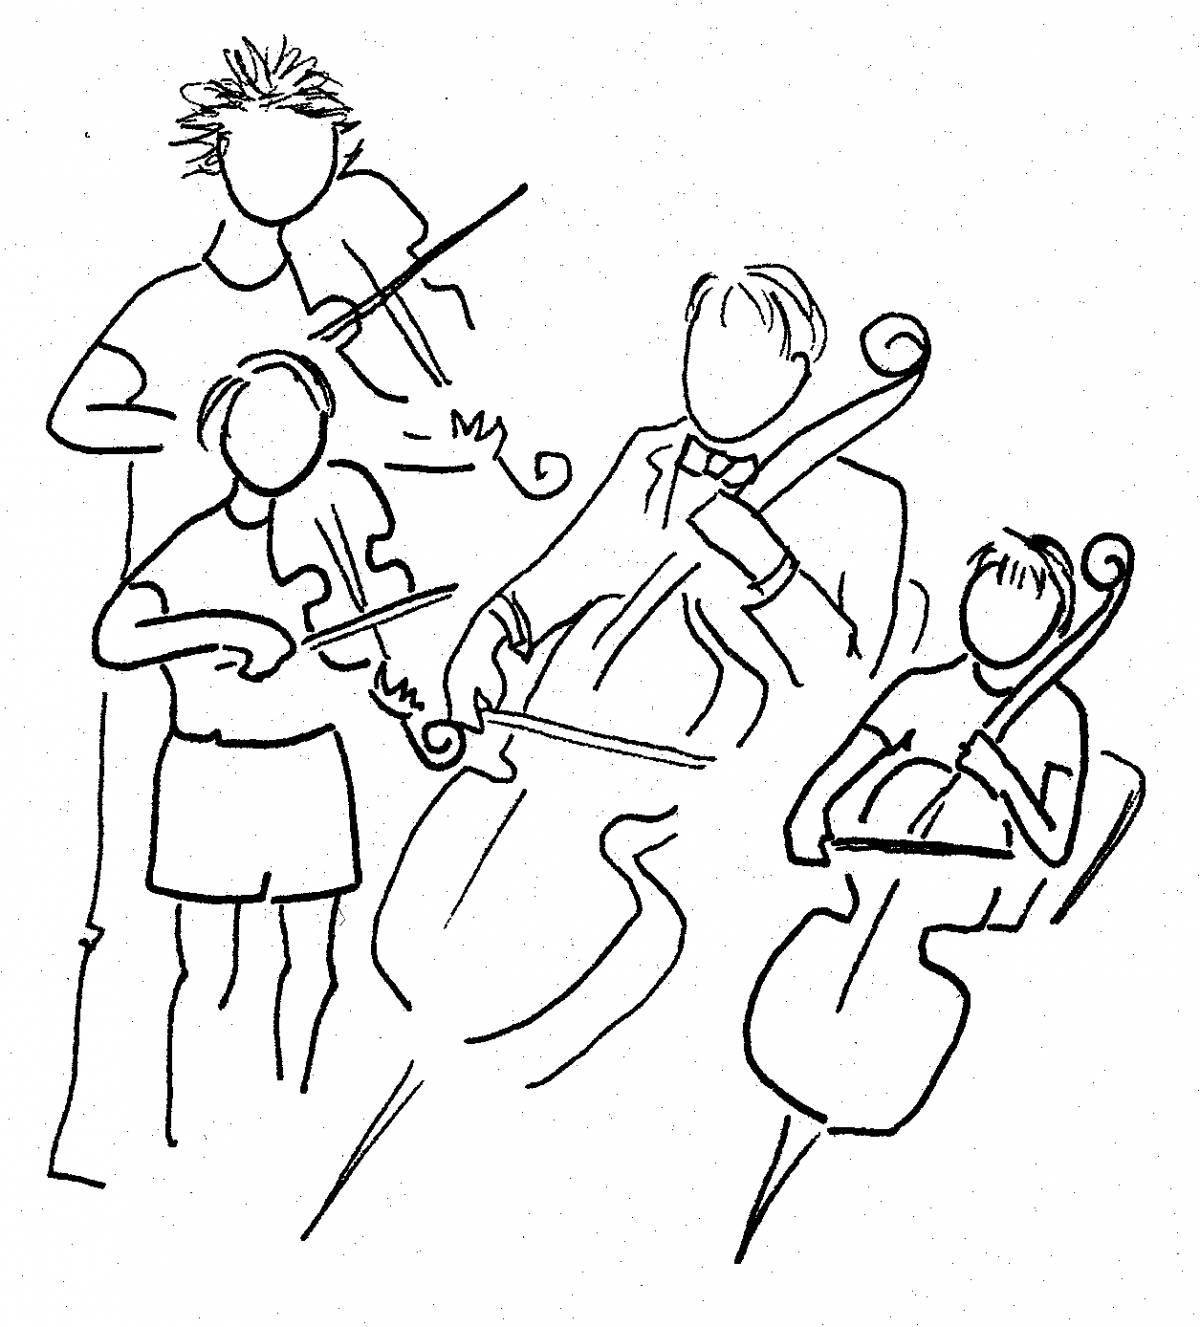 Royal symphony orchestra coloring page